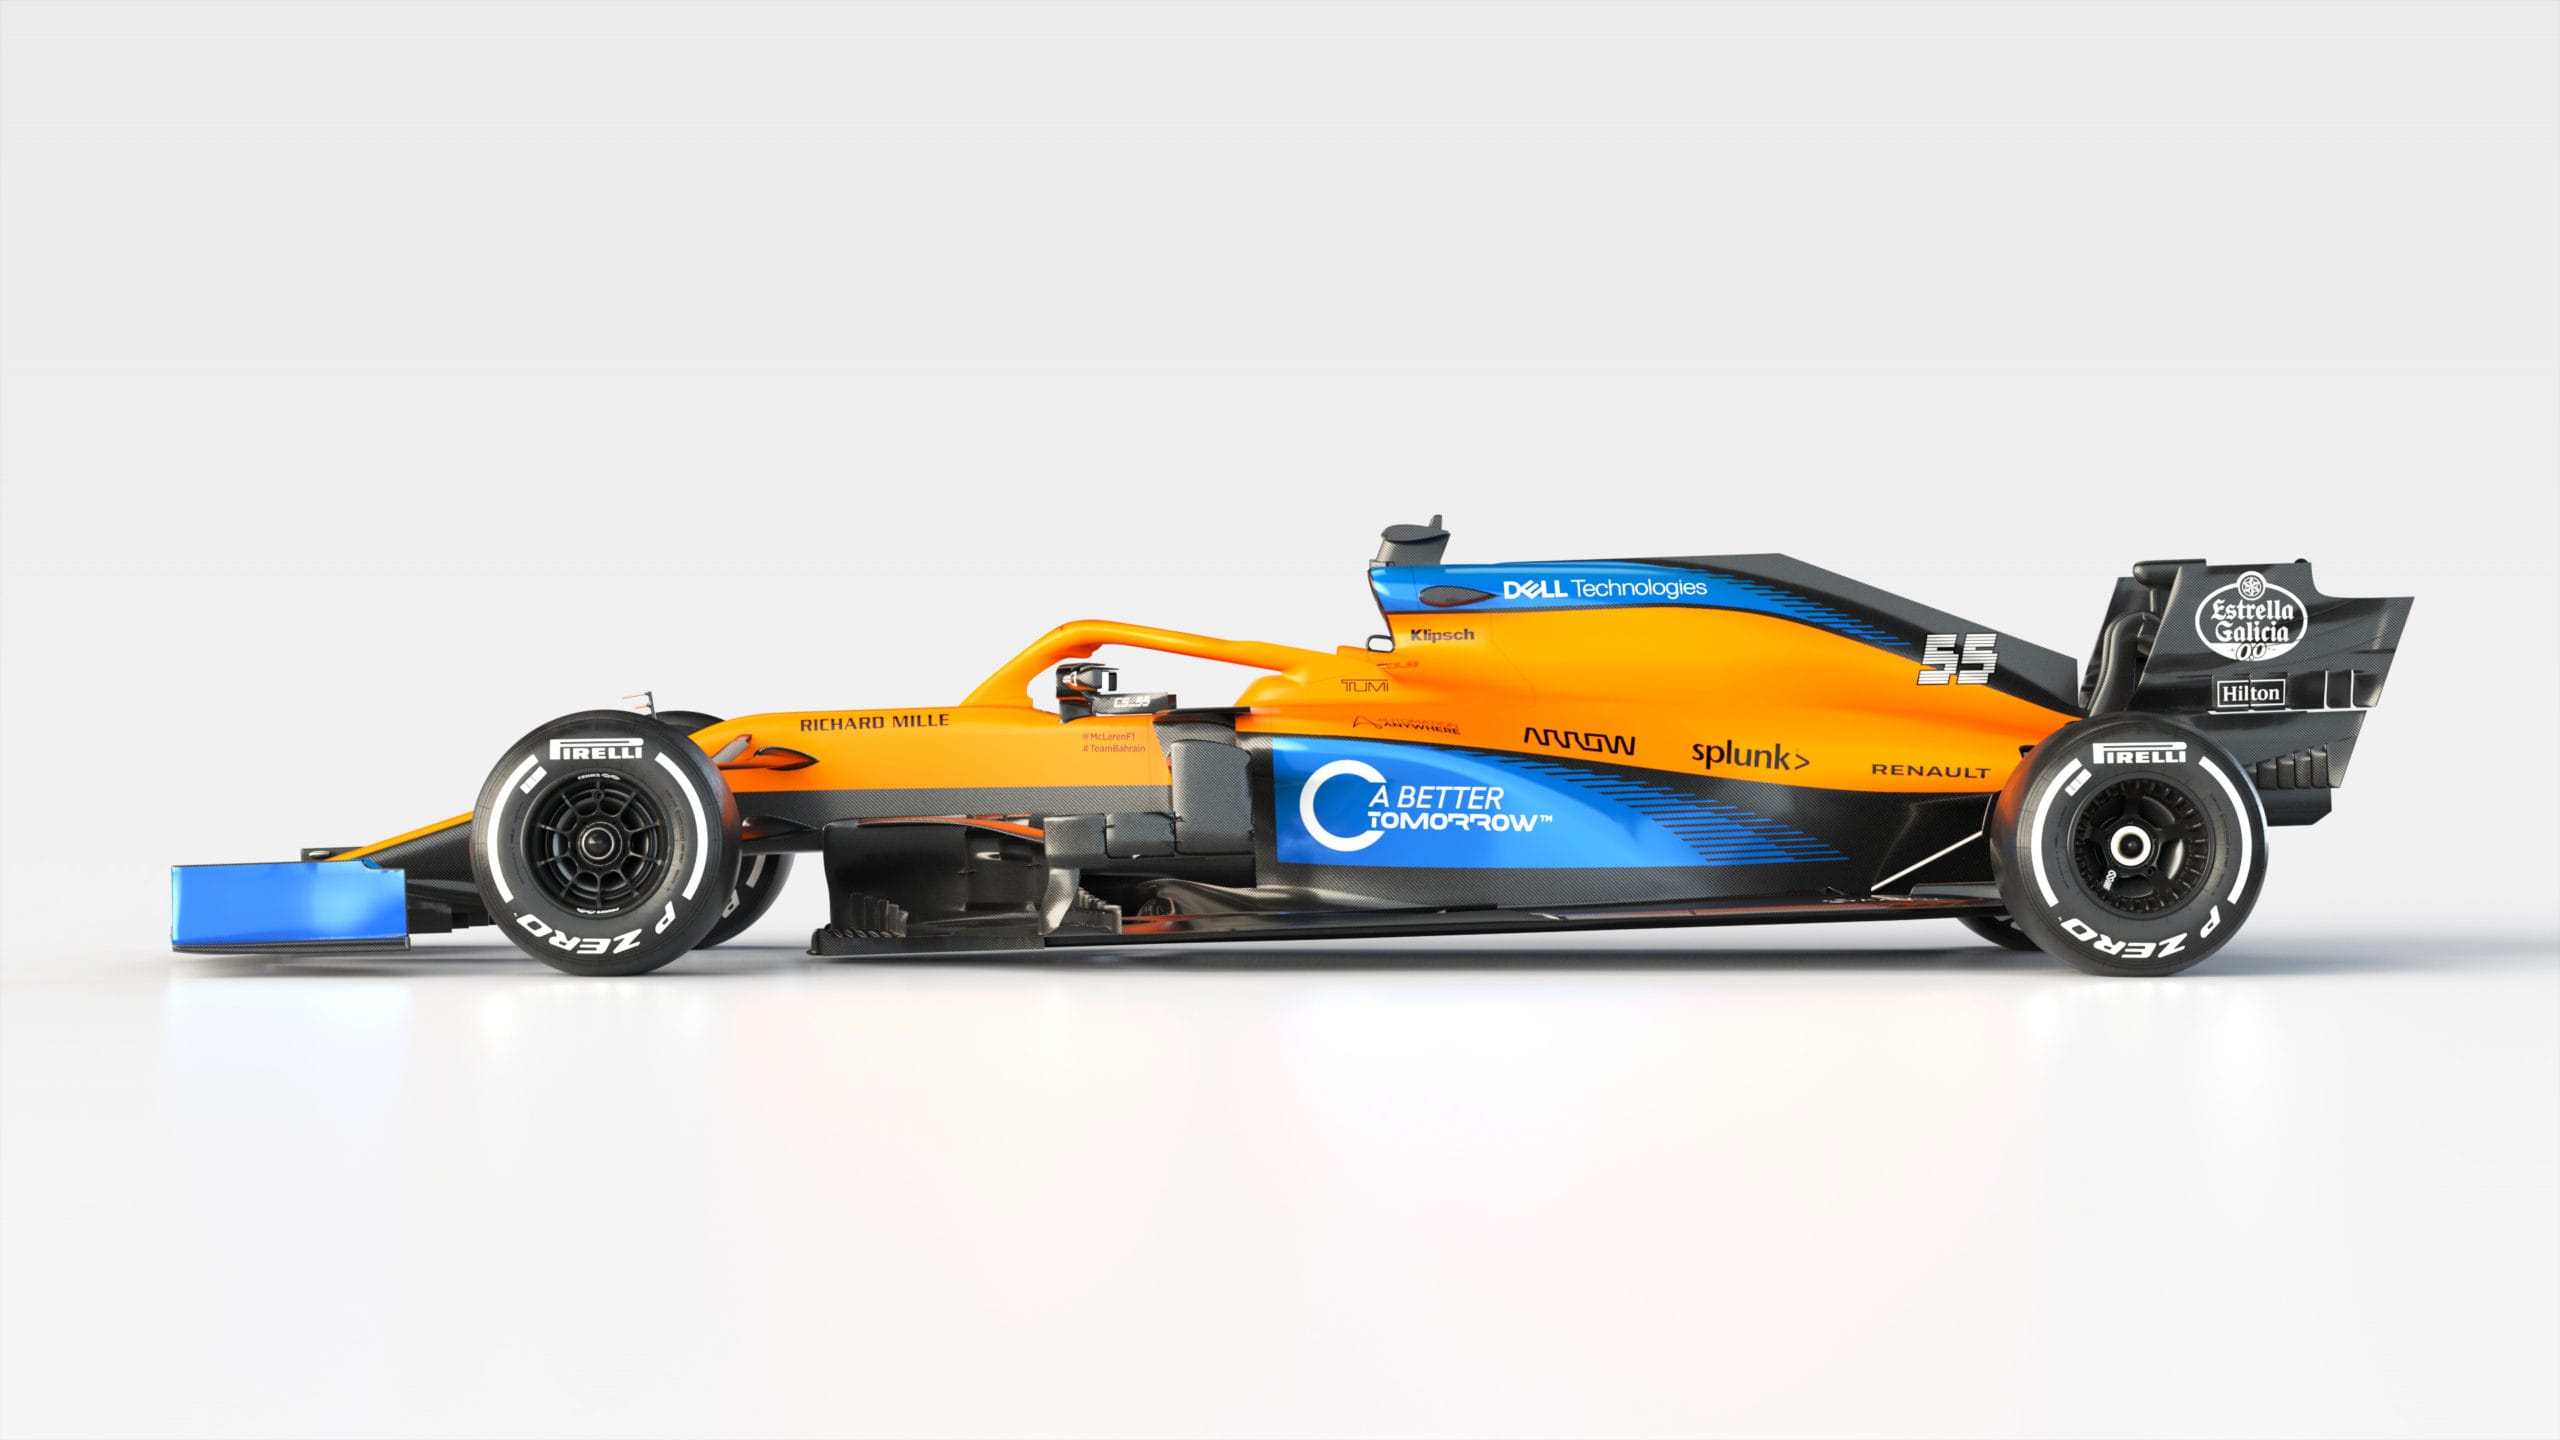 McLaren F1 Team launch their new car for 2020 MCL35 Checkered Flag